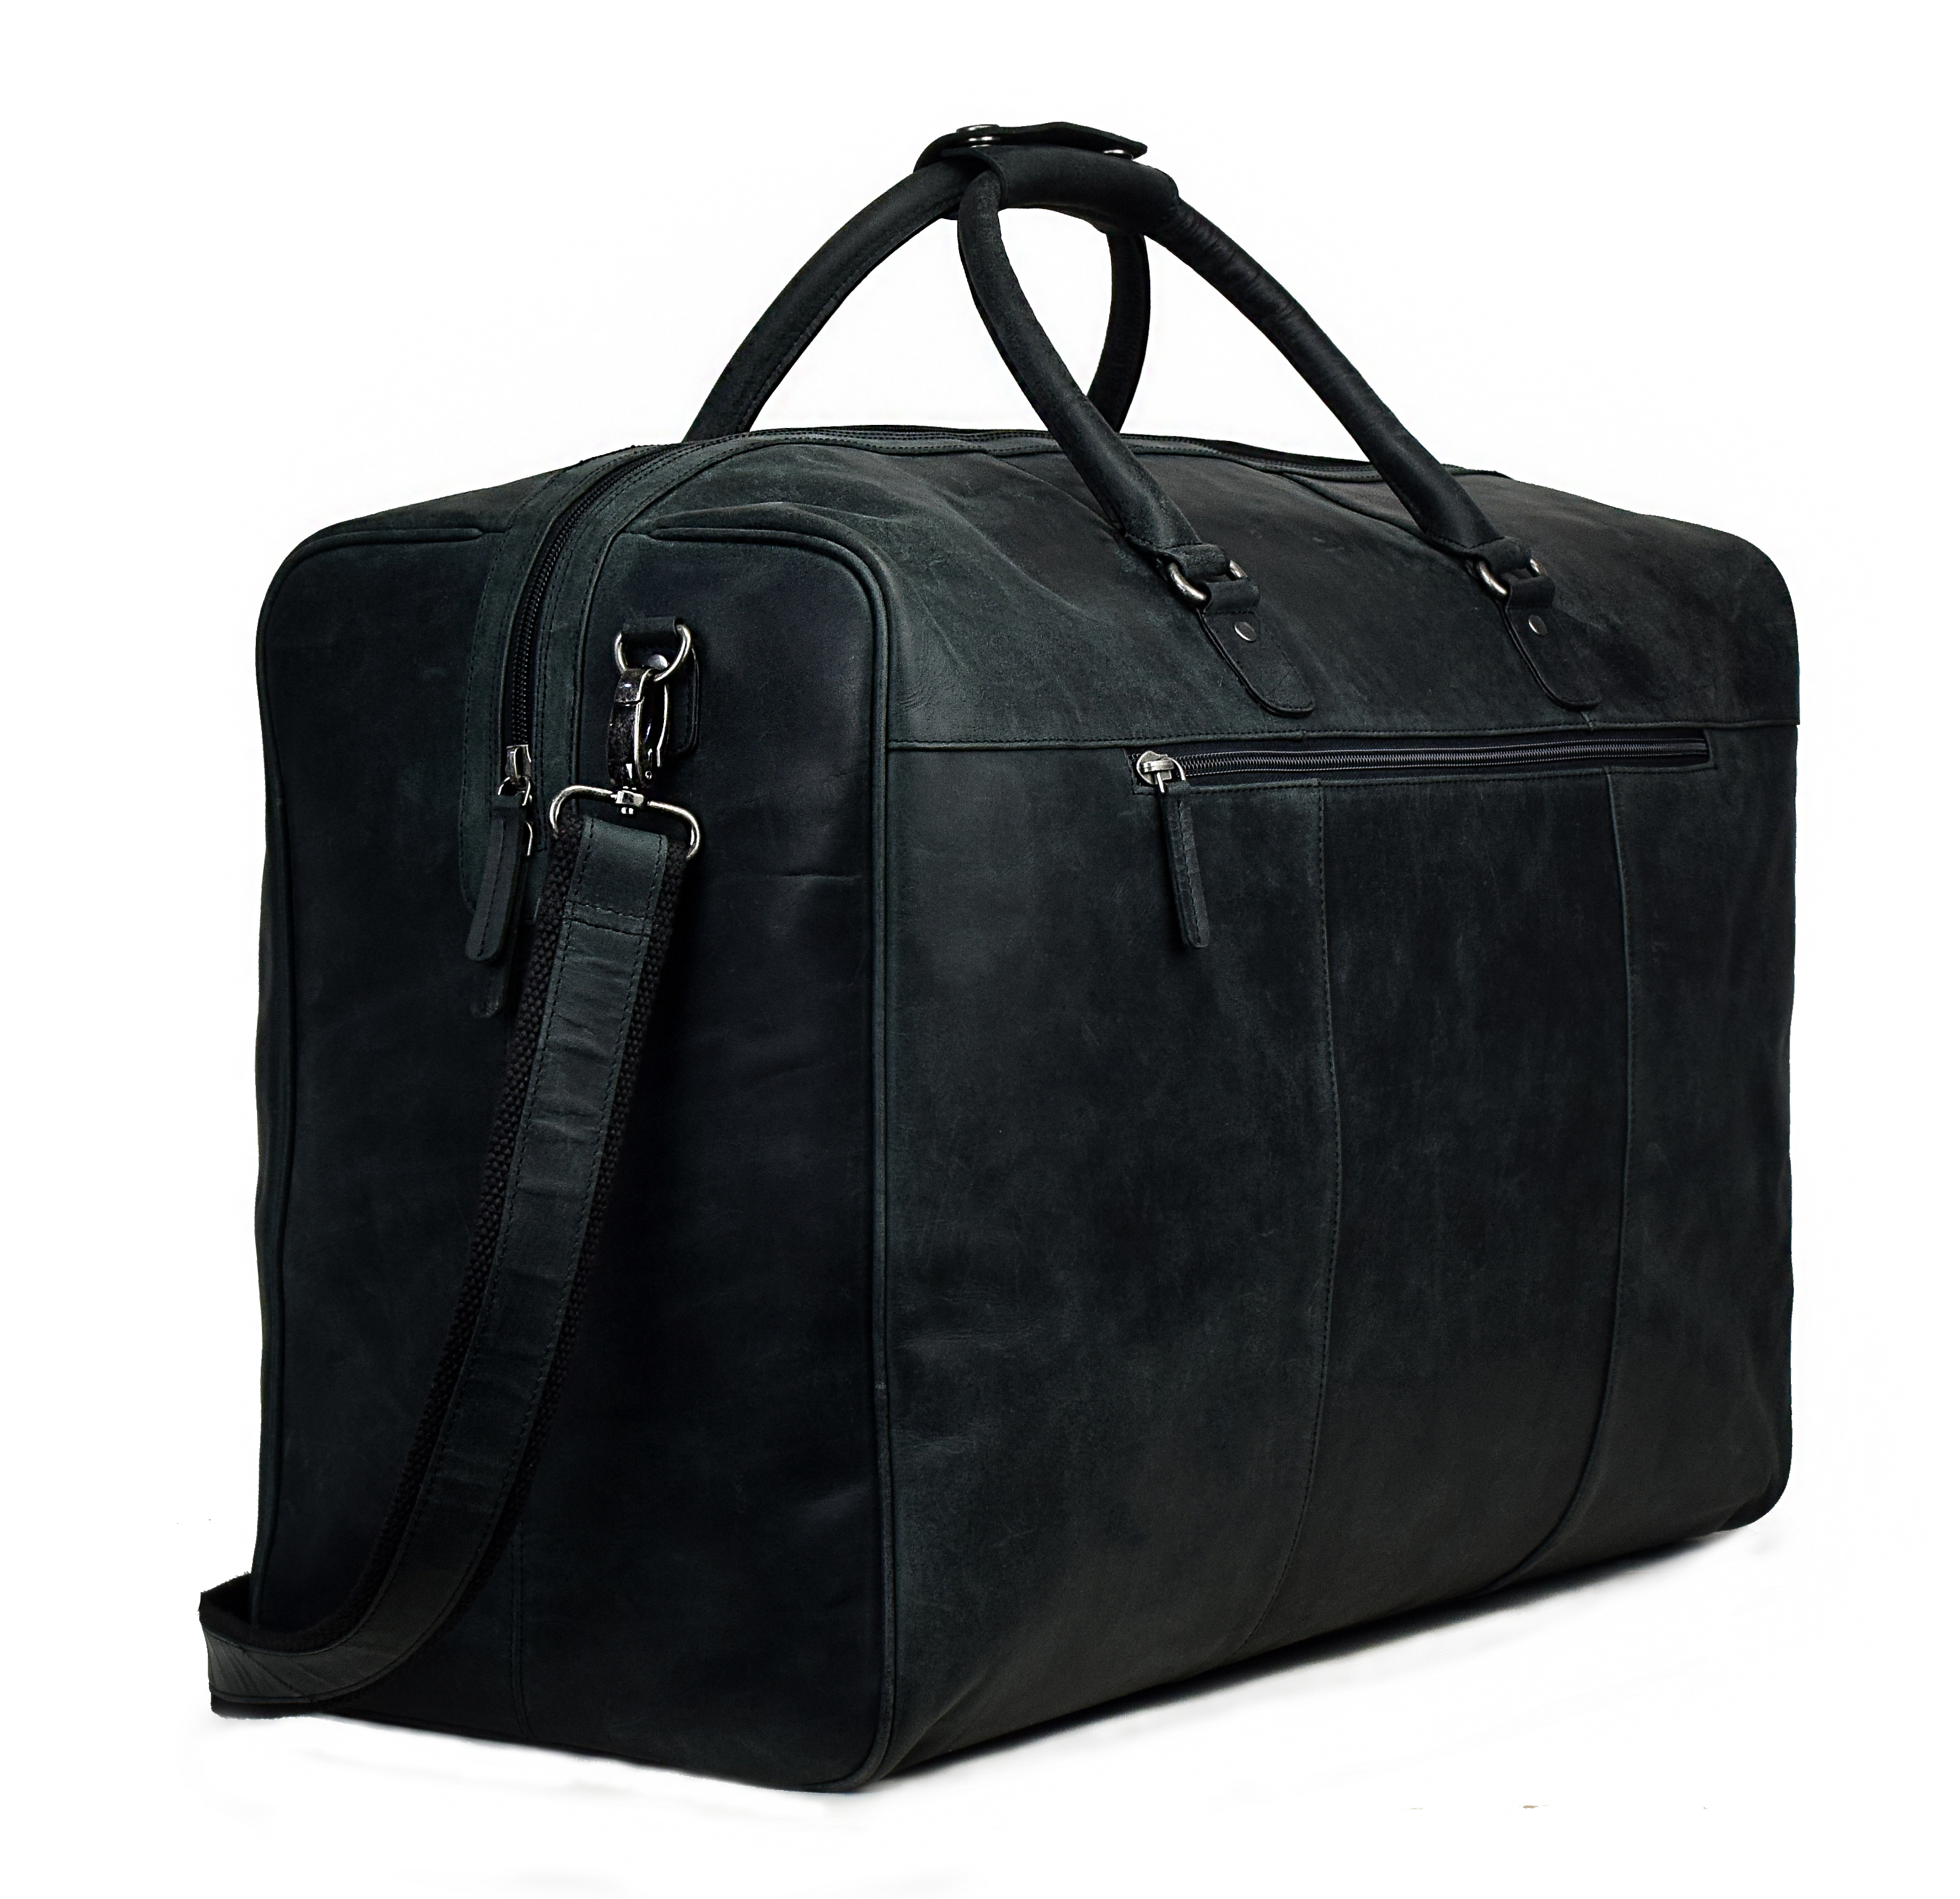 Travel bag by Dolphin Leathers